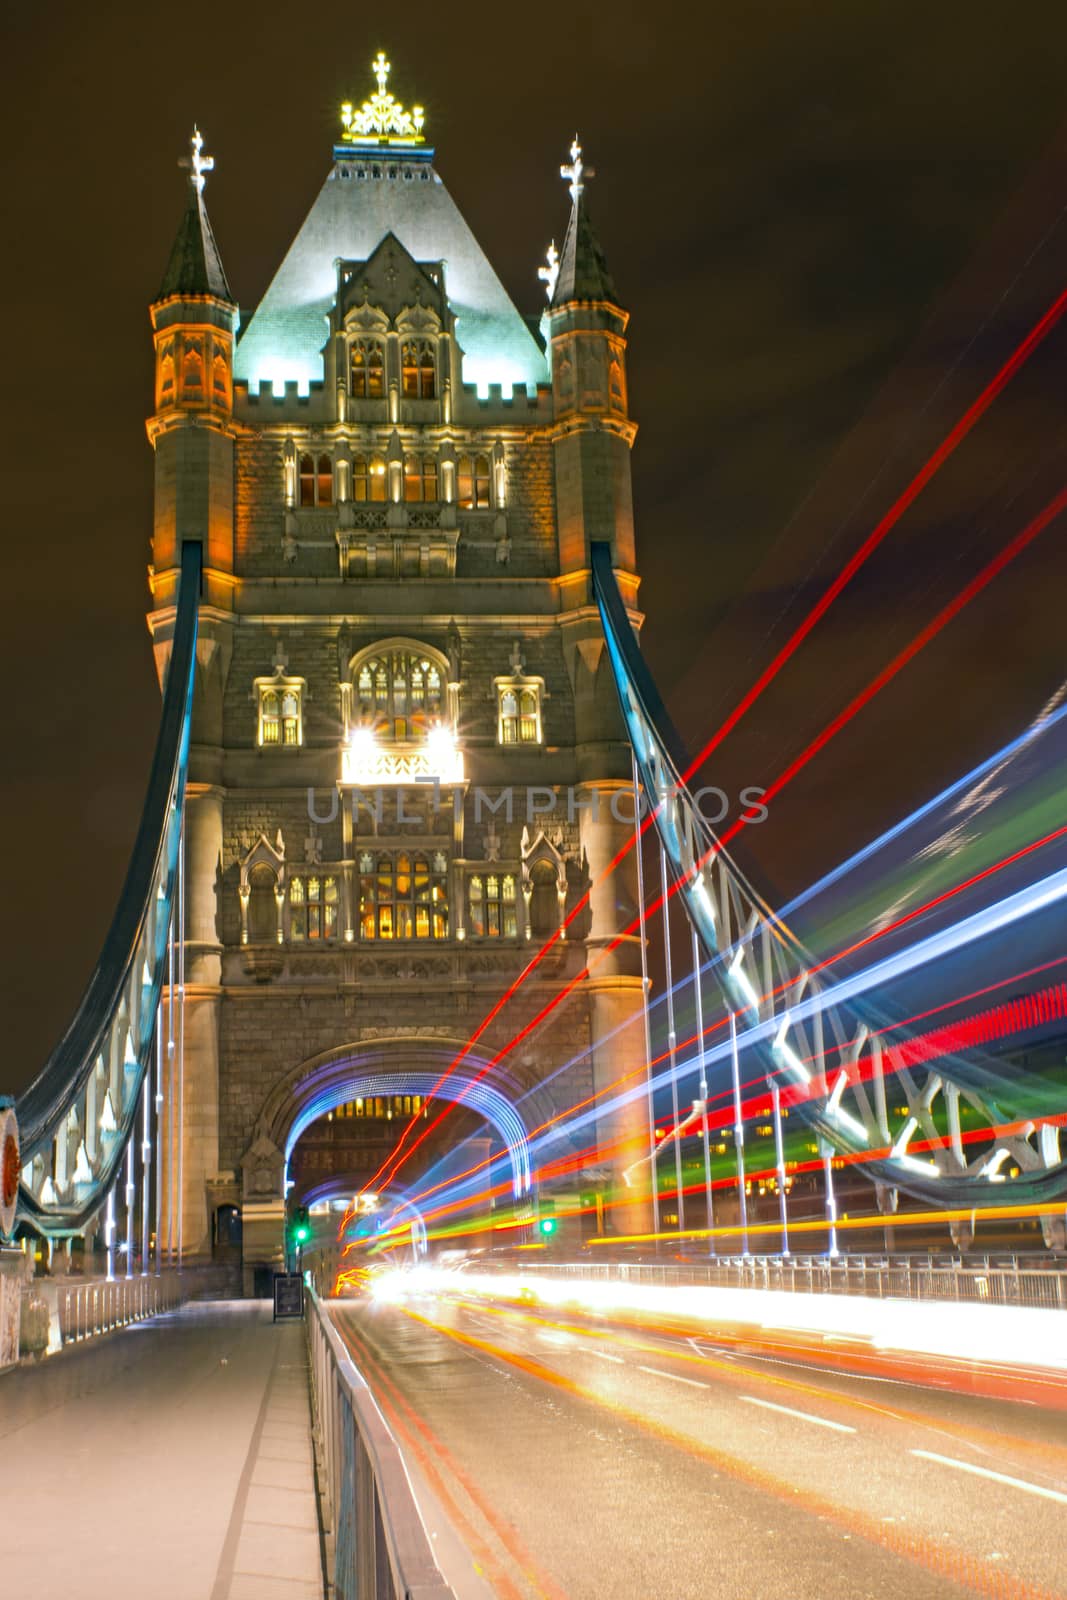 The illuminated Tower Bridge in London with traffic lights